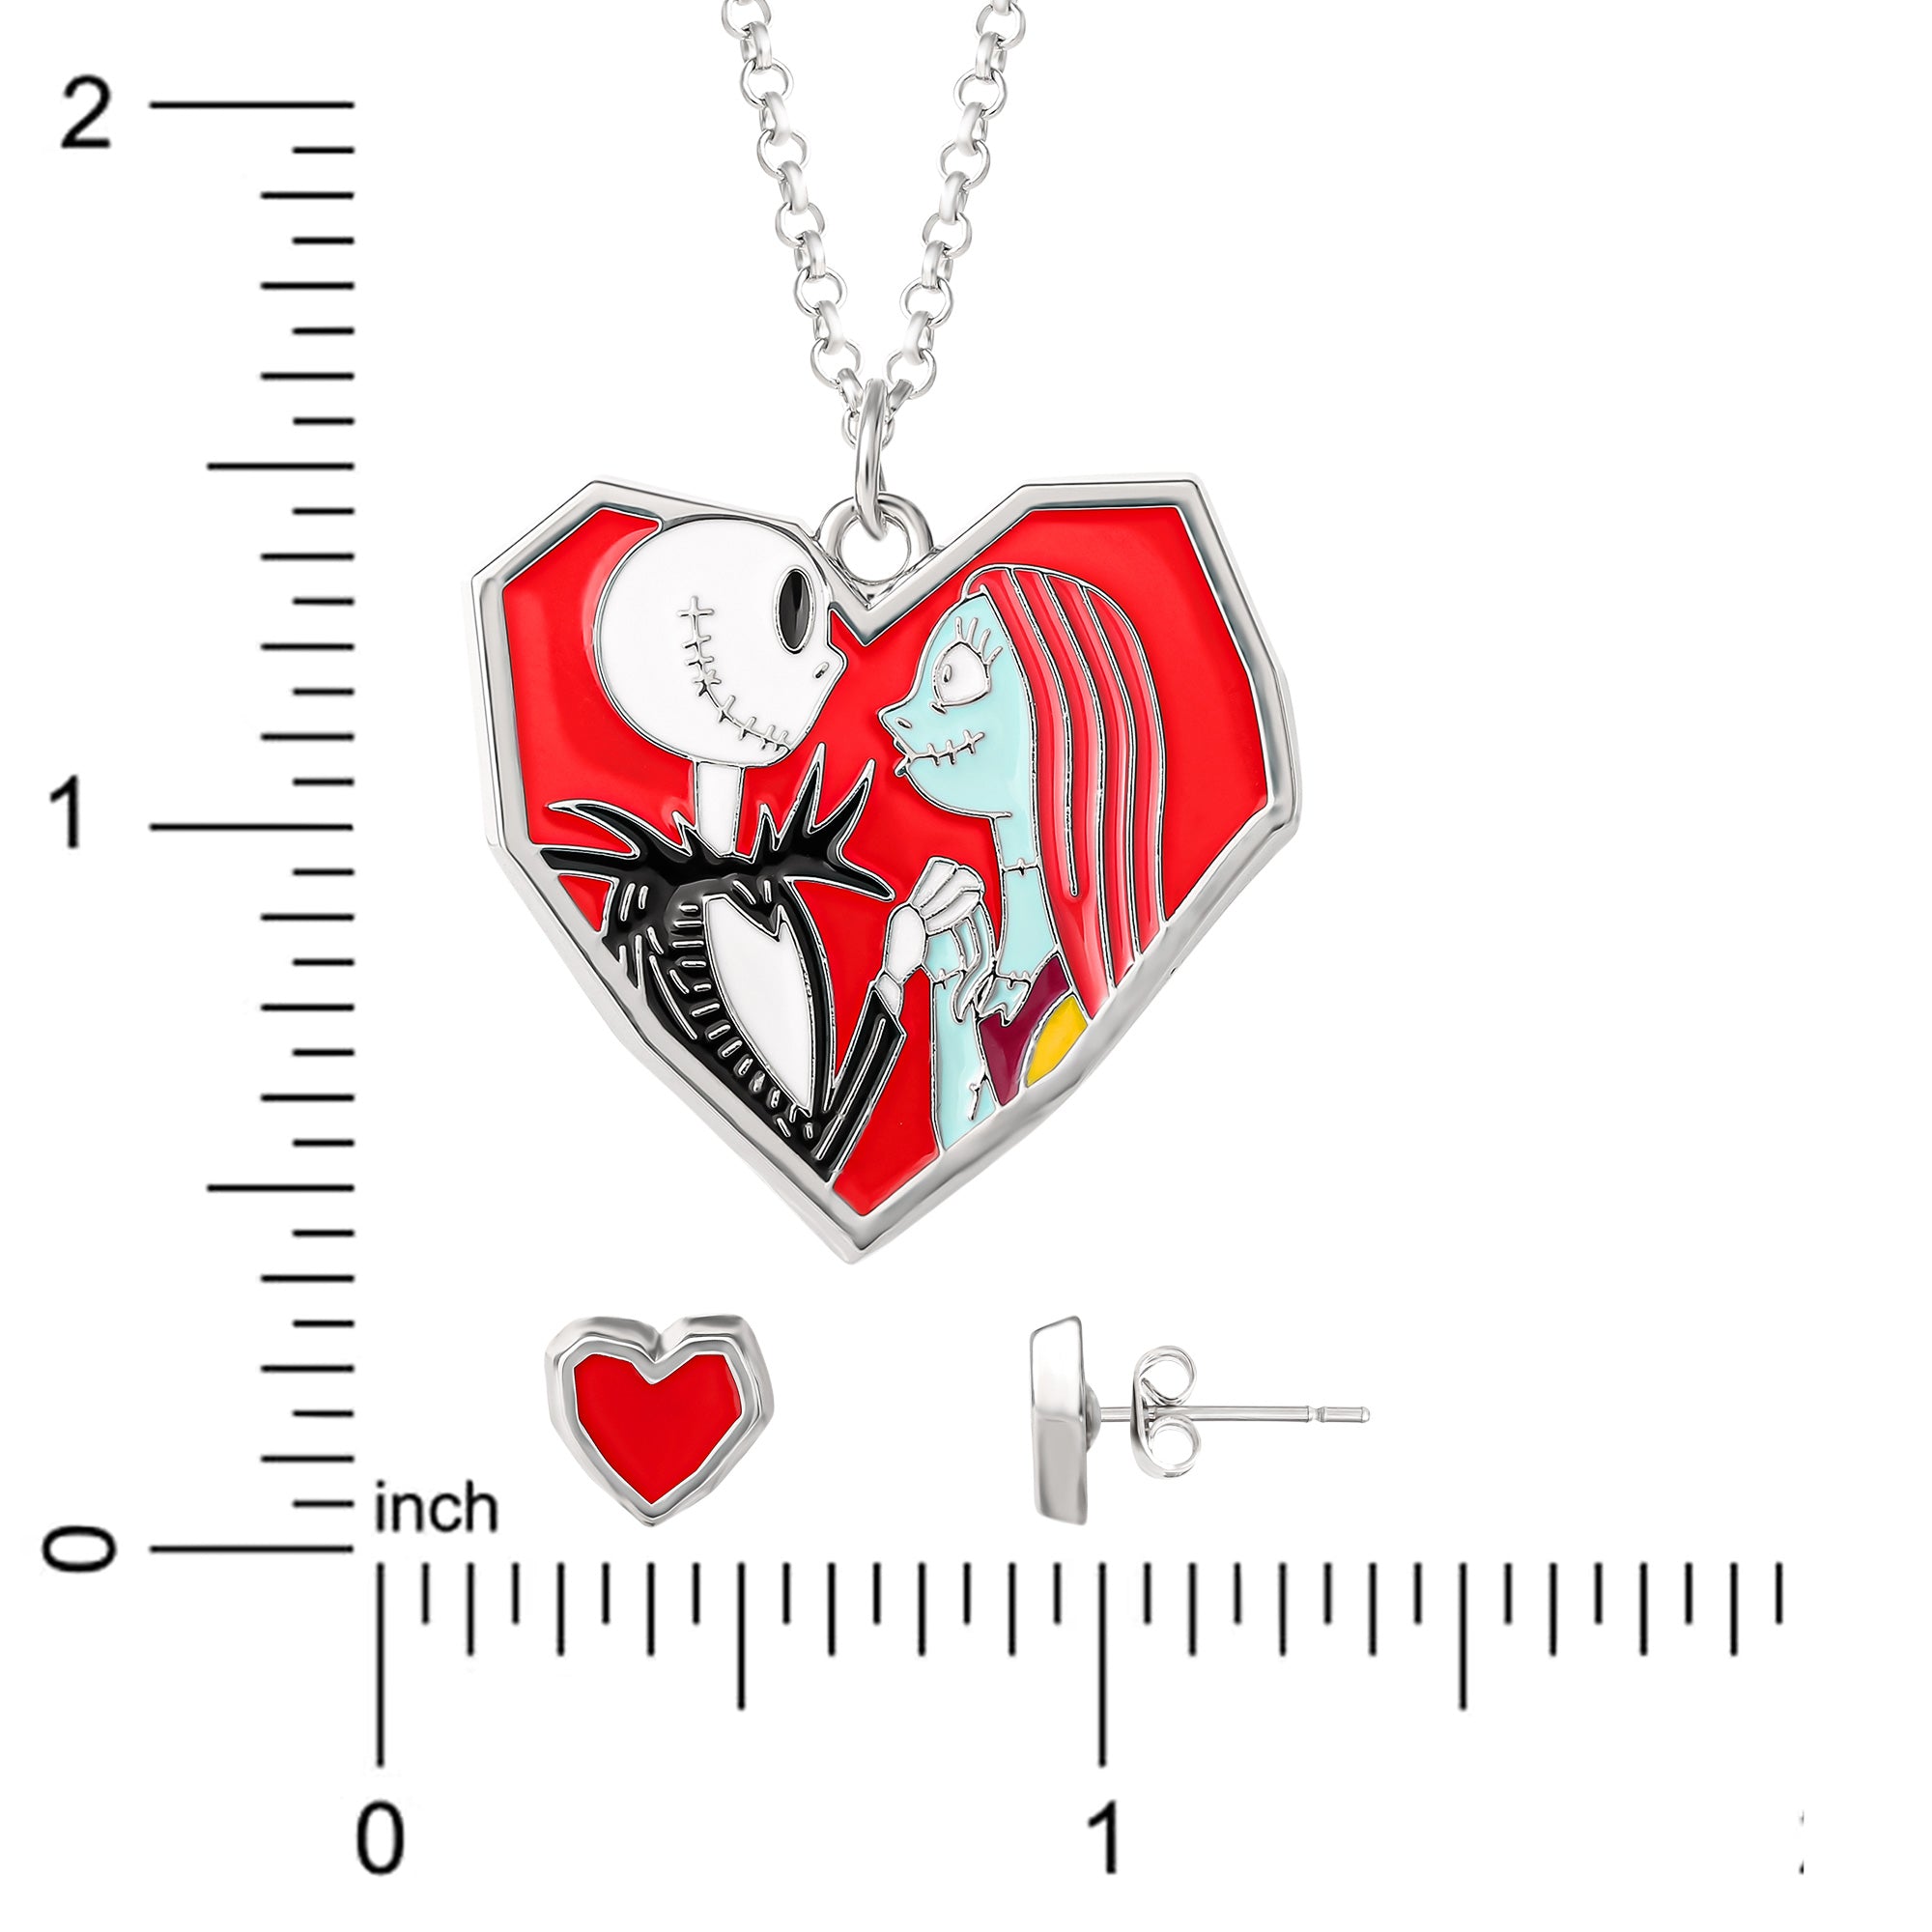 Disney The Nightmare Before Christmas Earring and Necklace Set